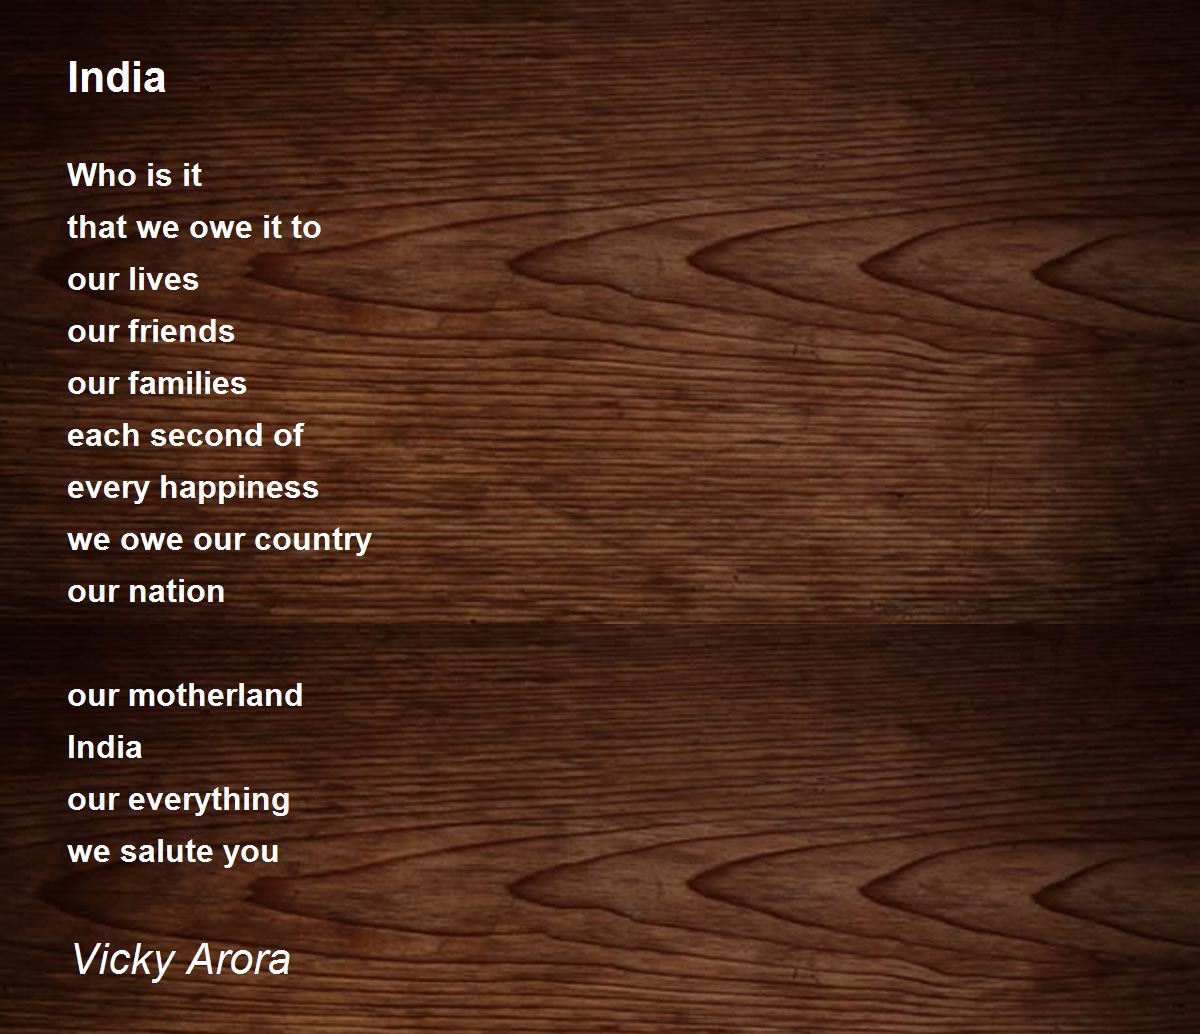 tourism india growing global attraction poem